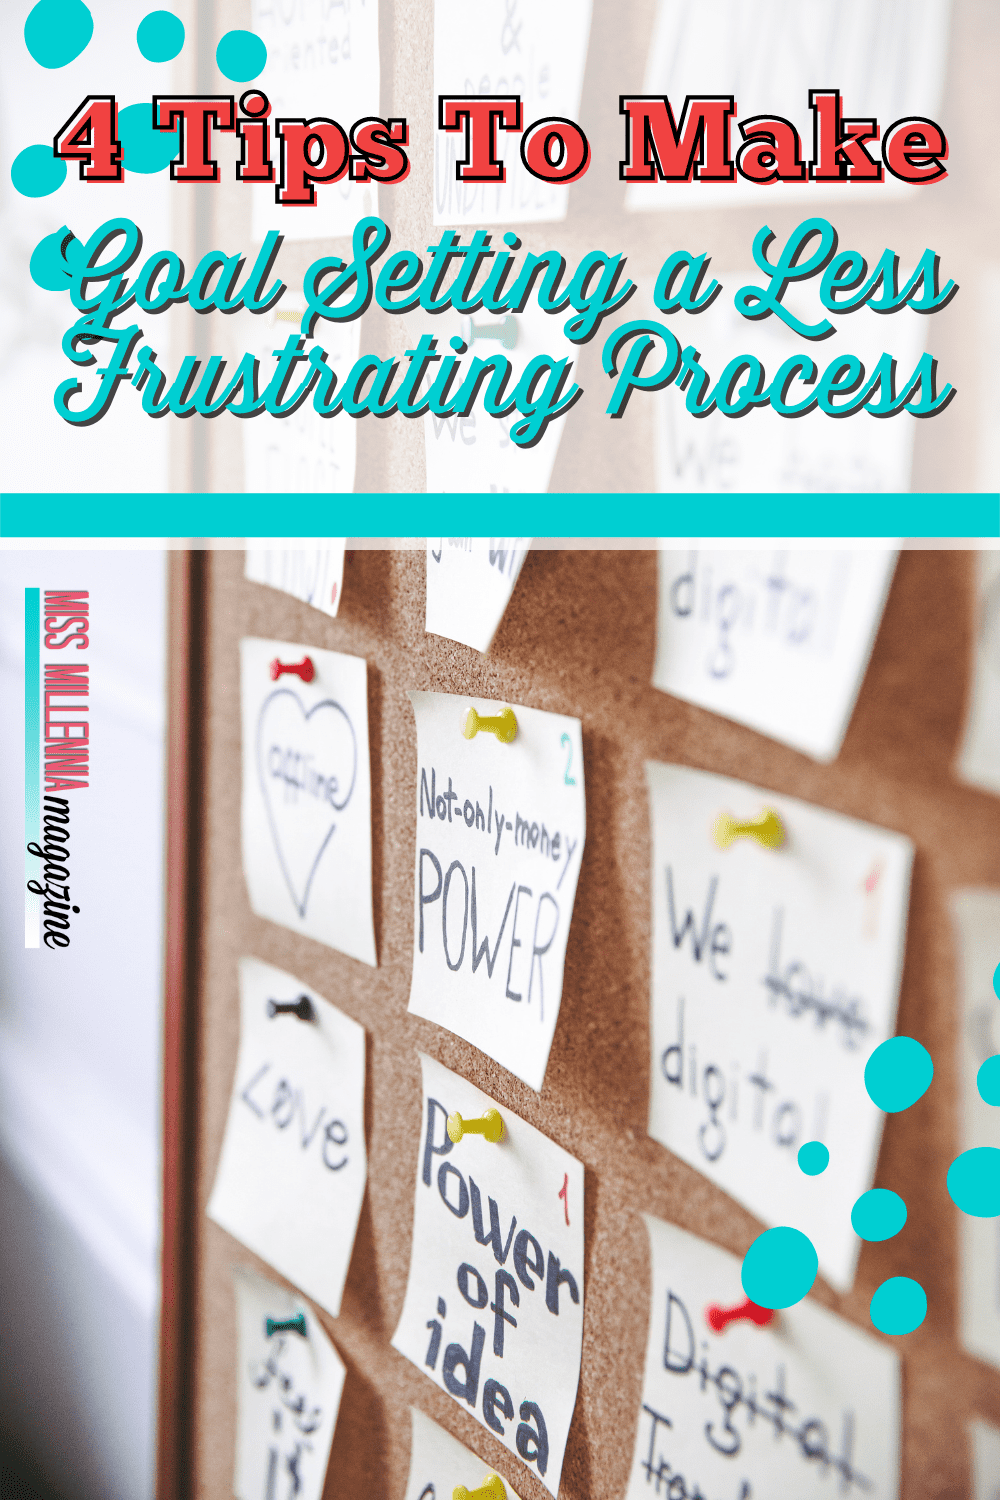 4 Tips To Make Goal Setting a Less Frustrating Process